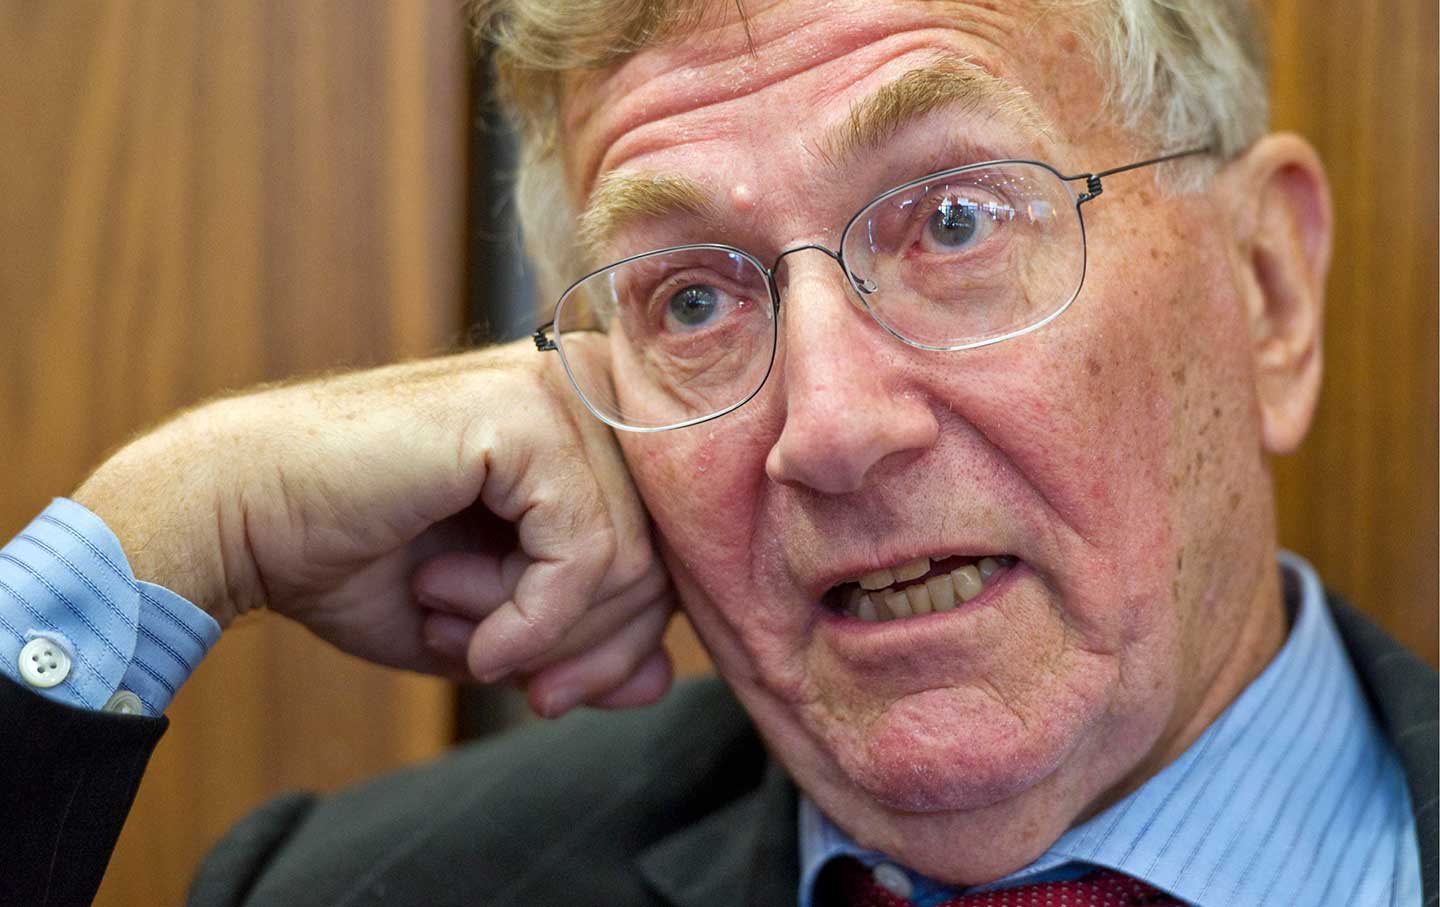 Don’t Underestimate Trump: Seymour Hersh on the News, Past and Present